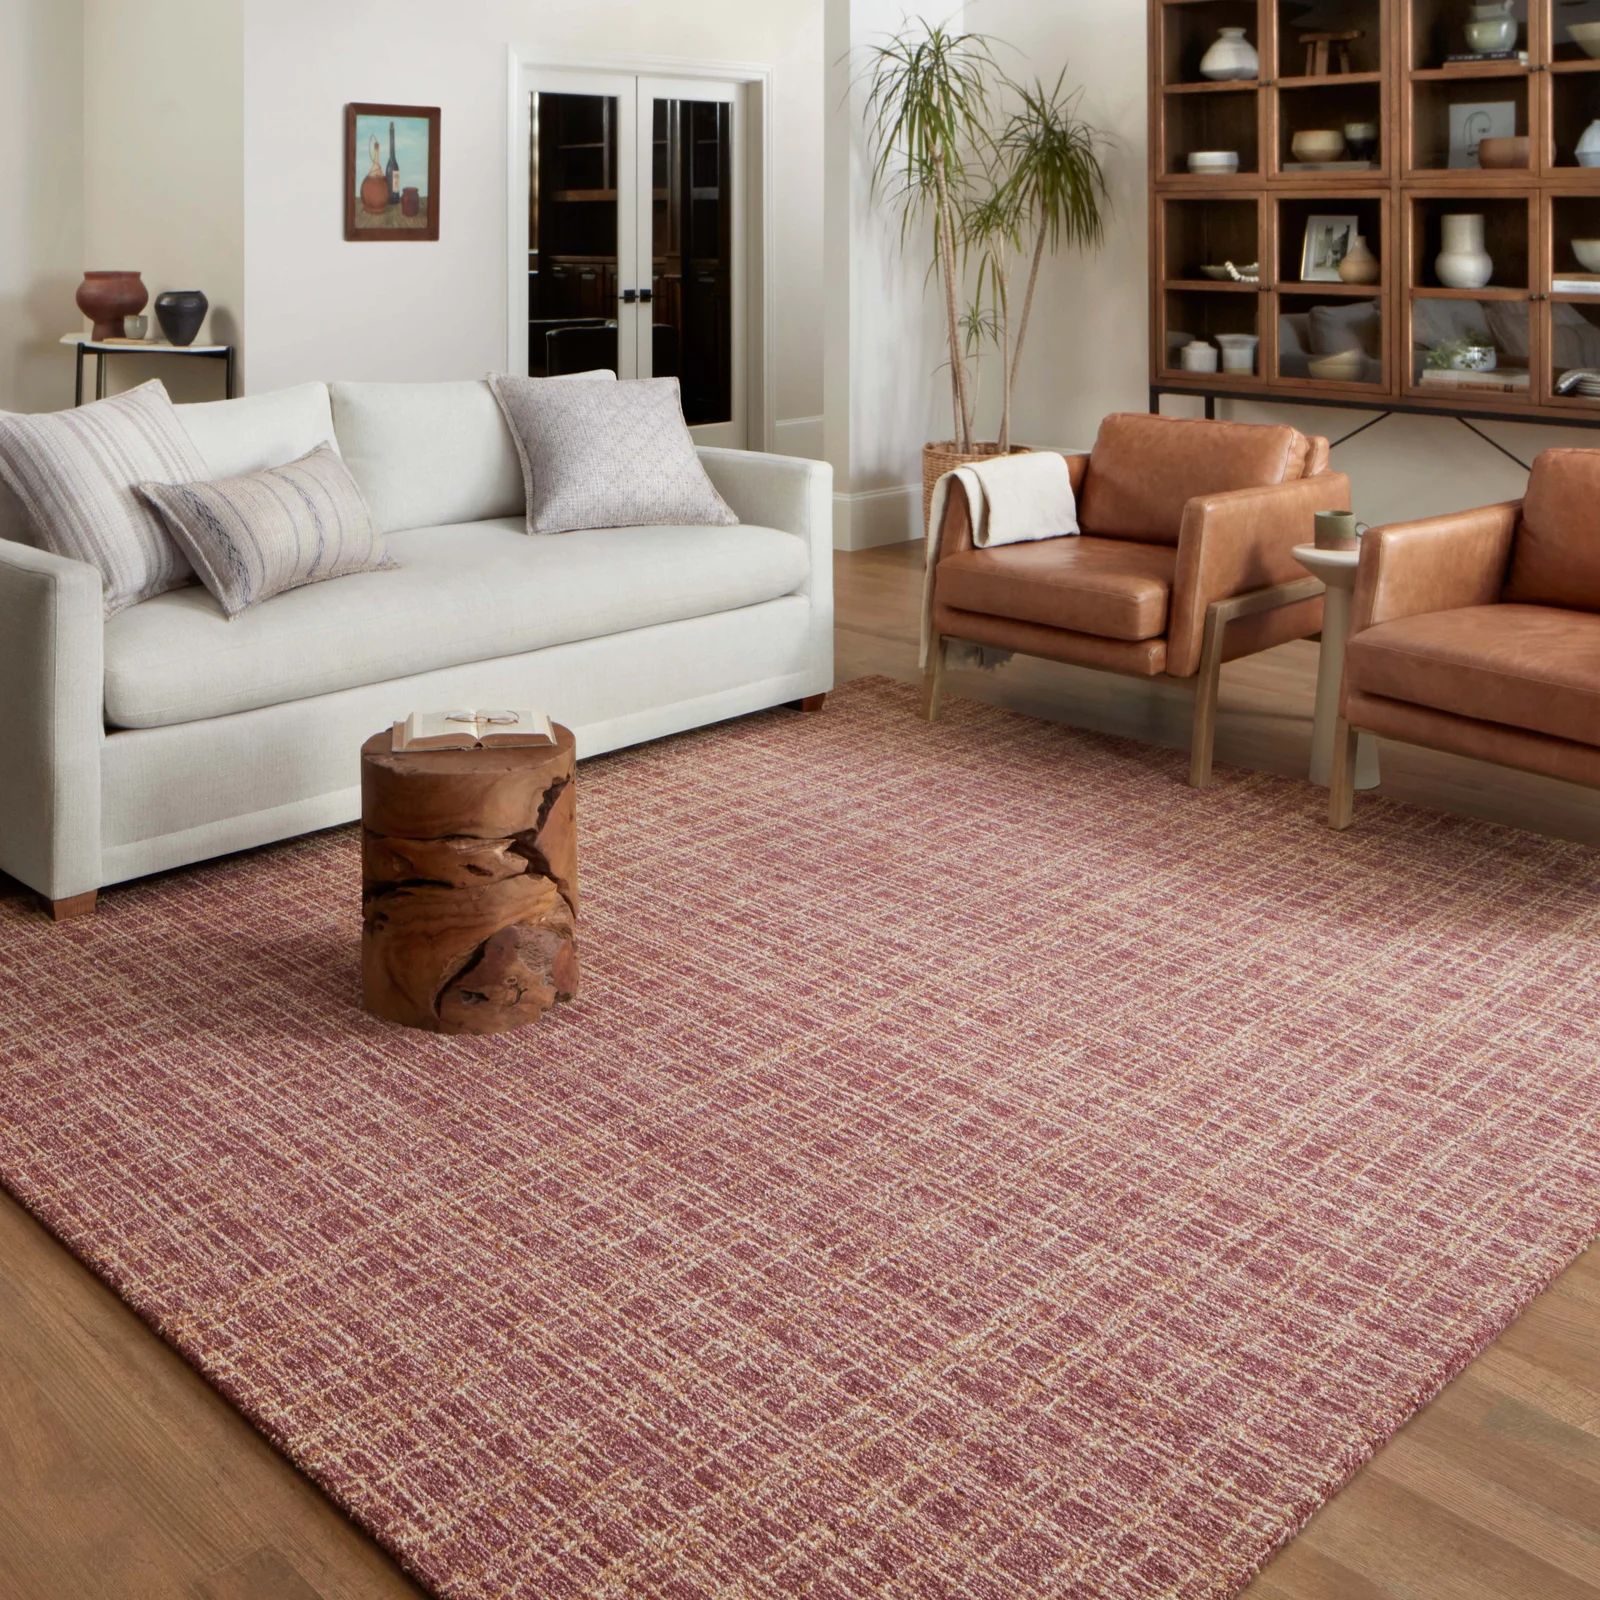 Checkered Handmade Tufted Area Rug in Berry/Natural | Wayfair North America